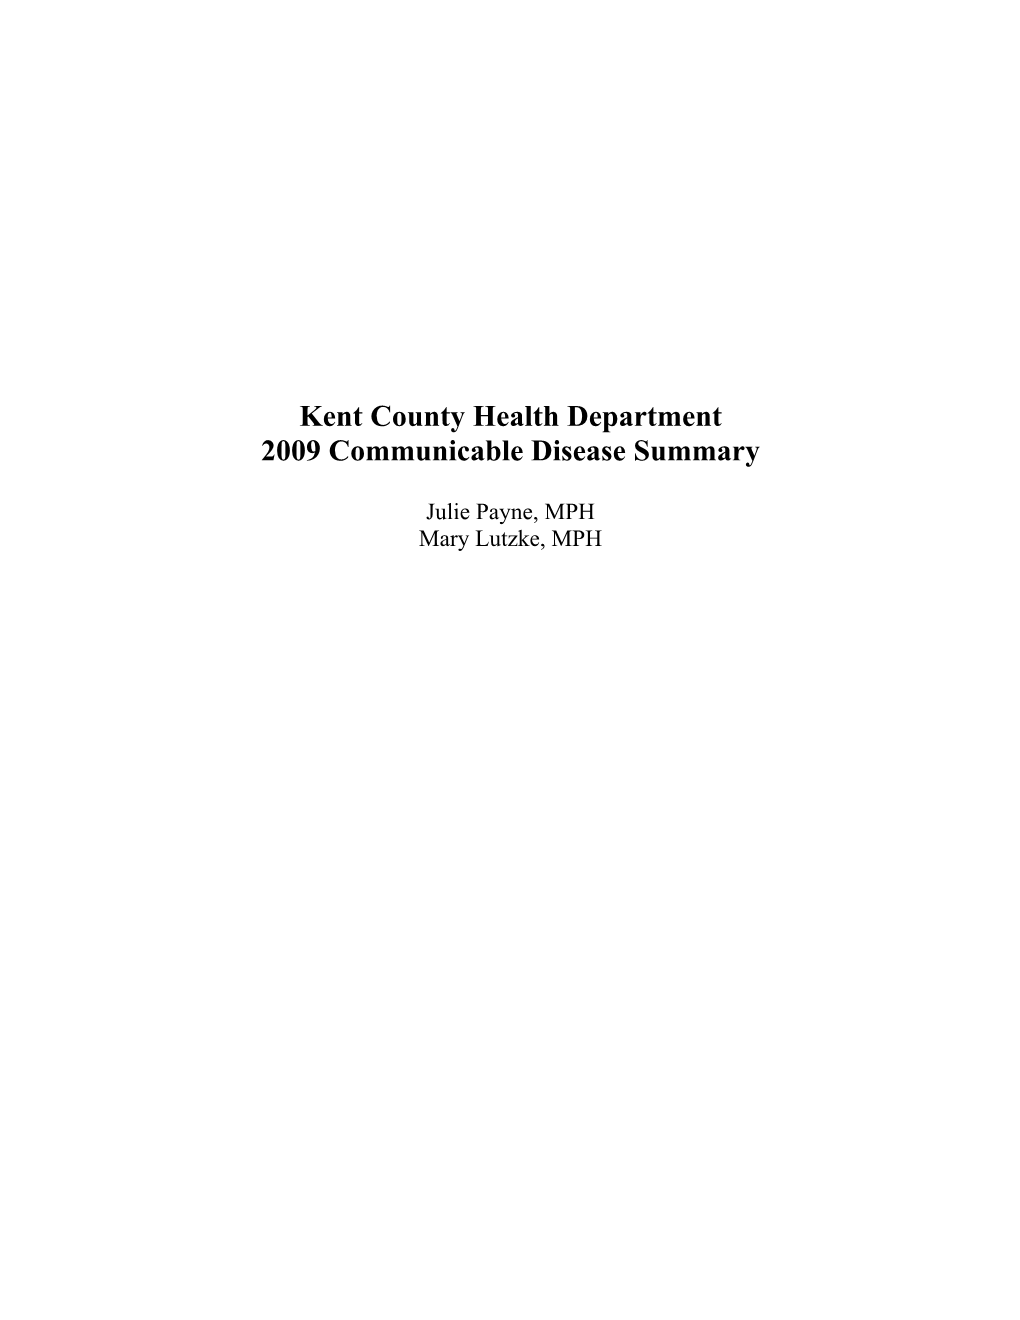 Kent County Health Department 2009 Communicable Disease Summary